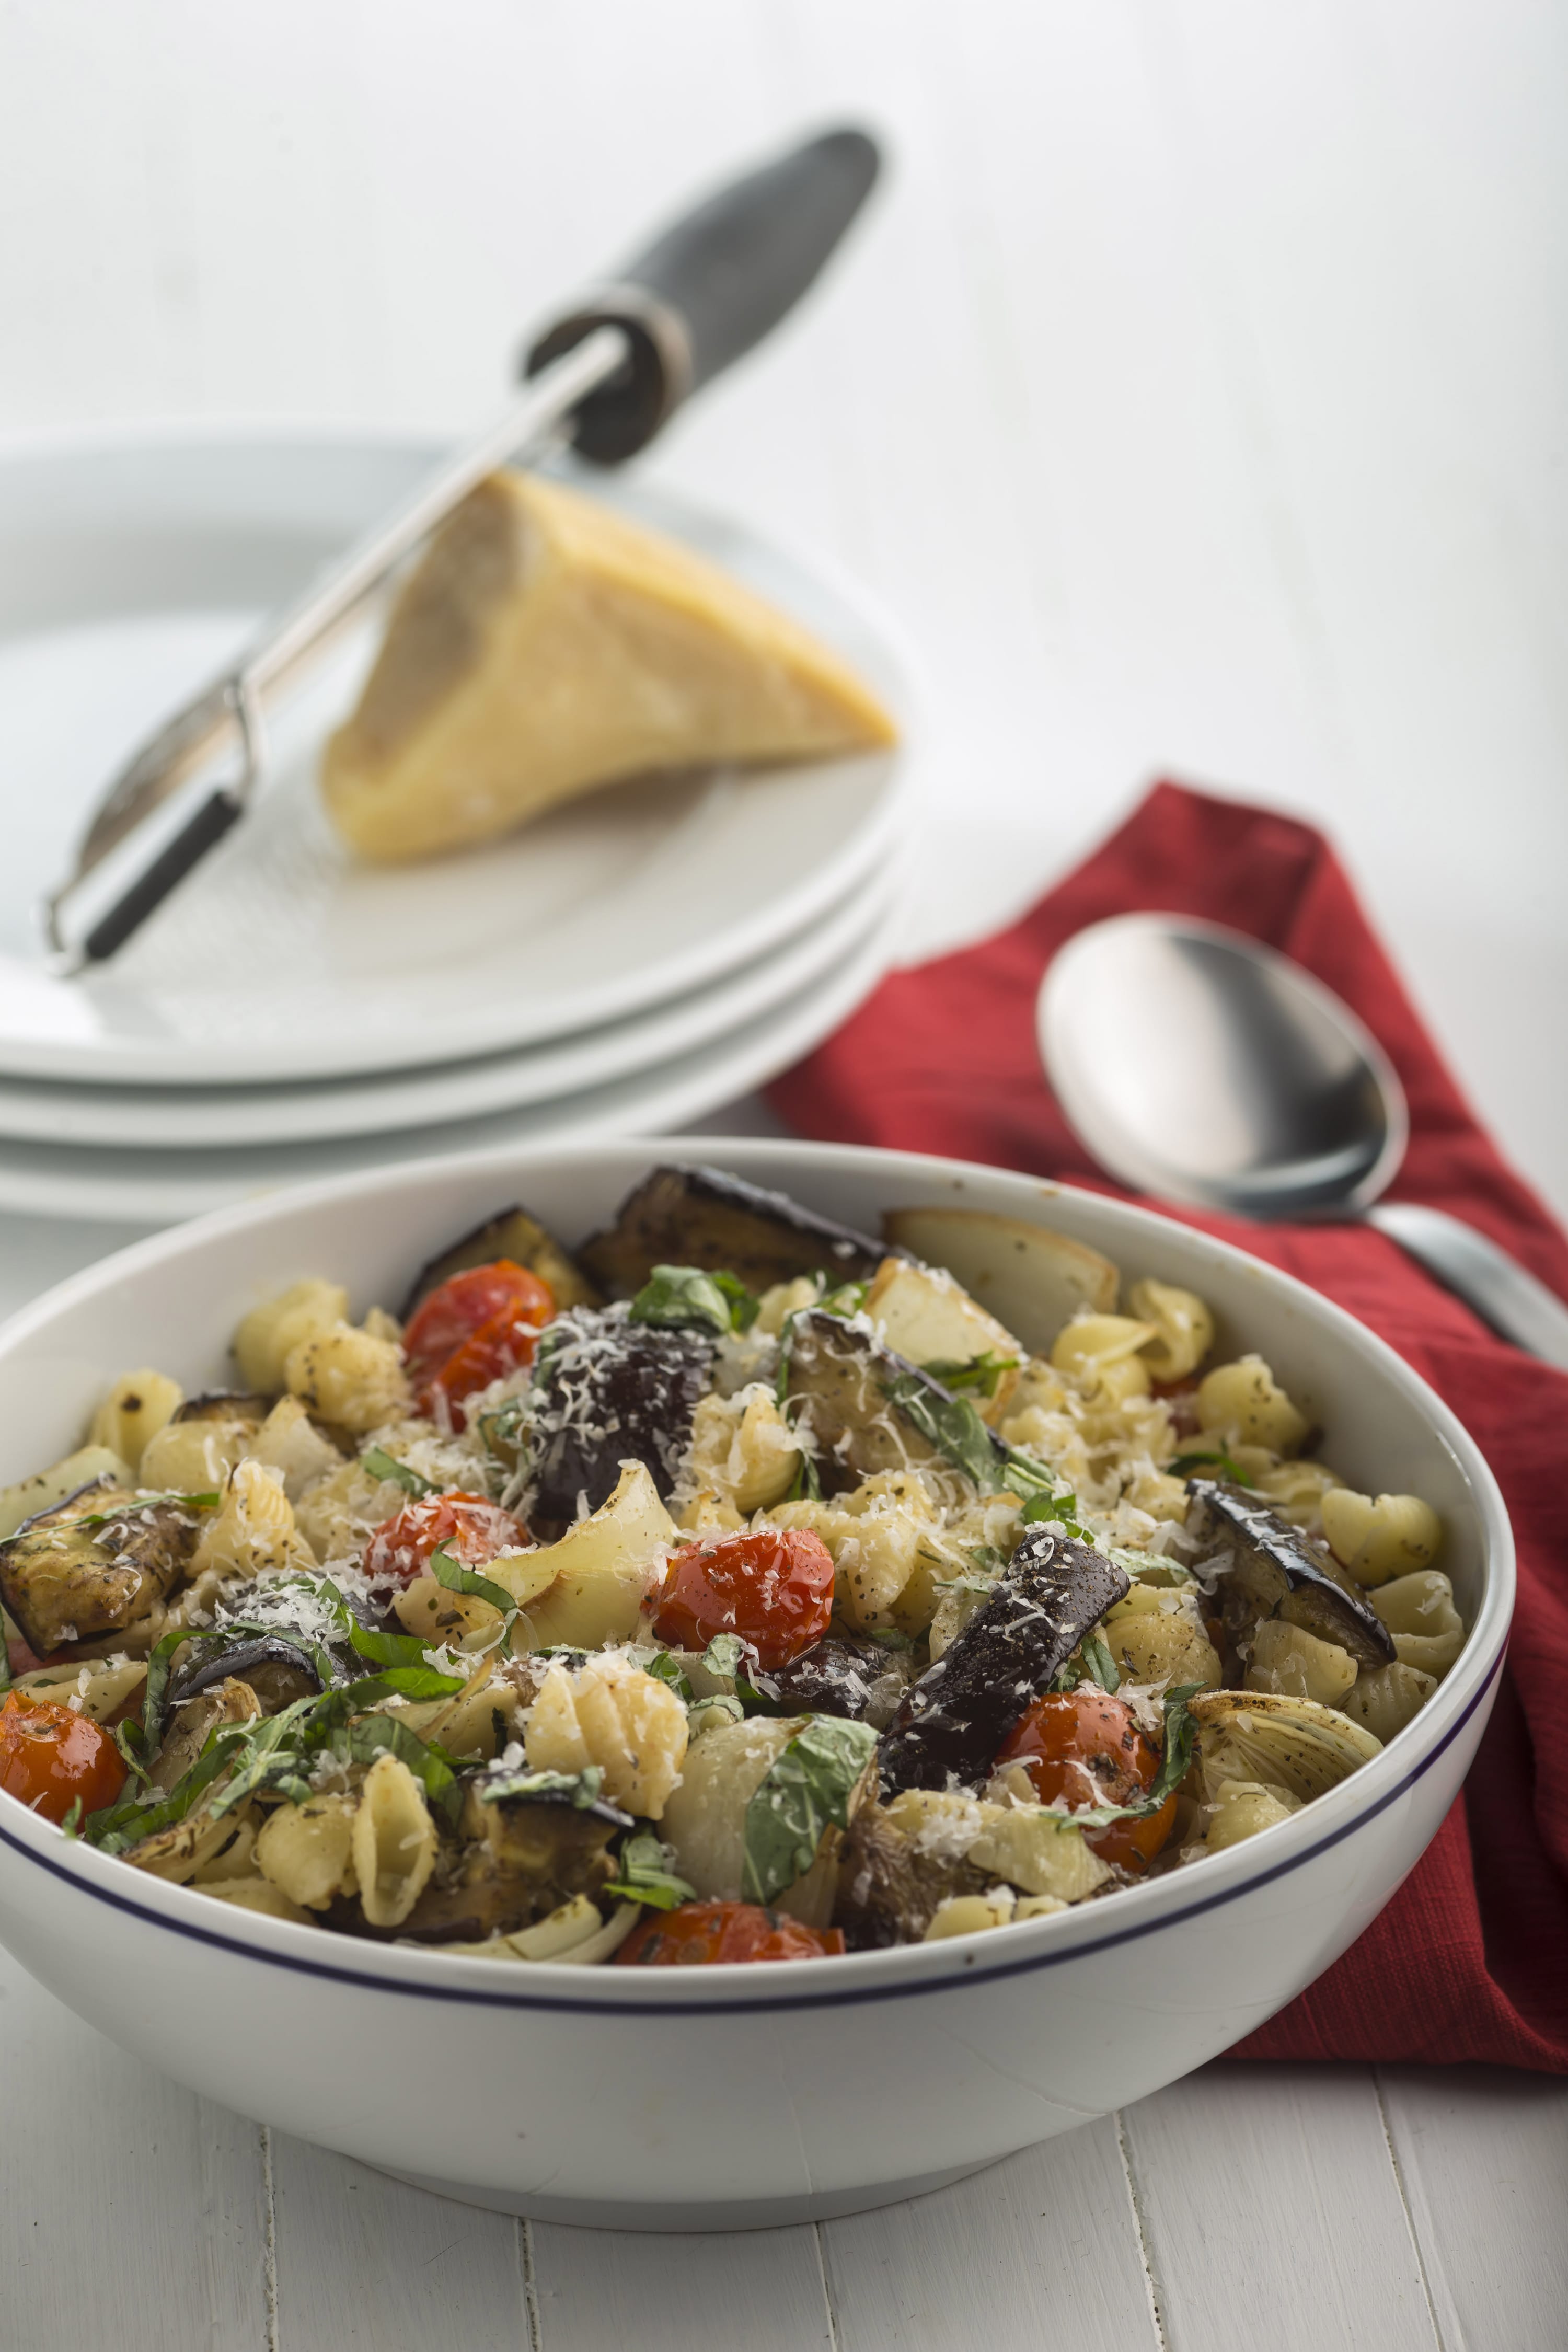 Pasta with roasted eggplant, onions and tomatoes.